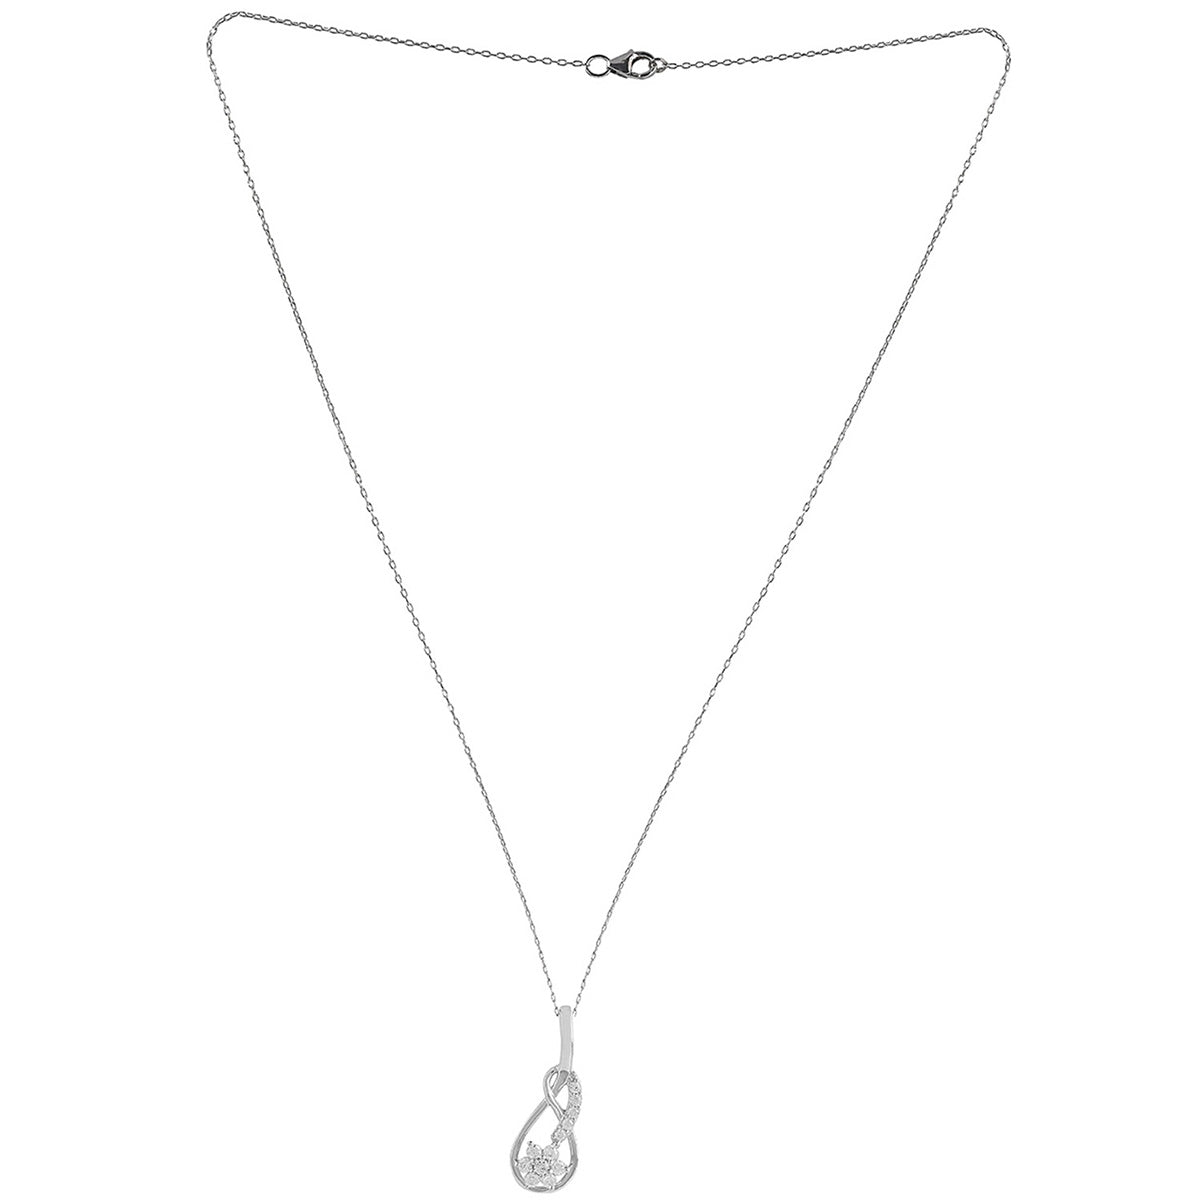 925 Sterling Silver CZ Infinity Shaped Pendant with Chain